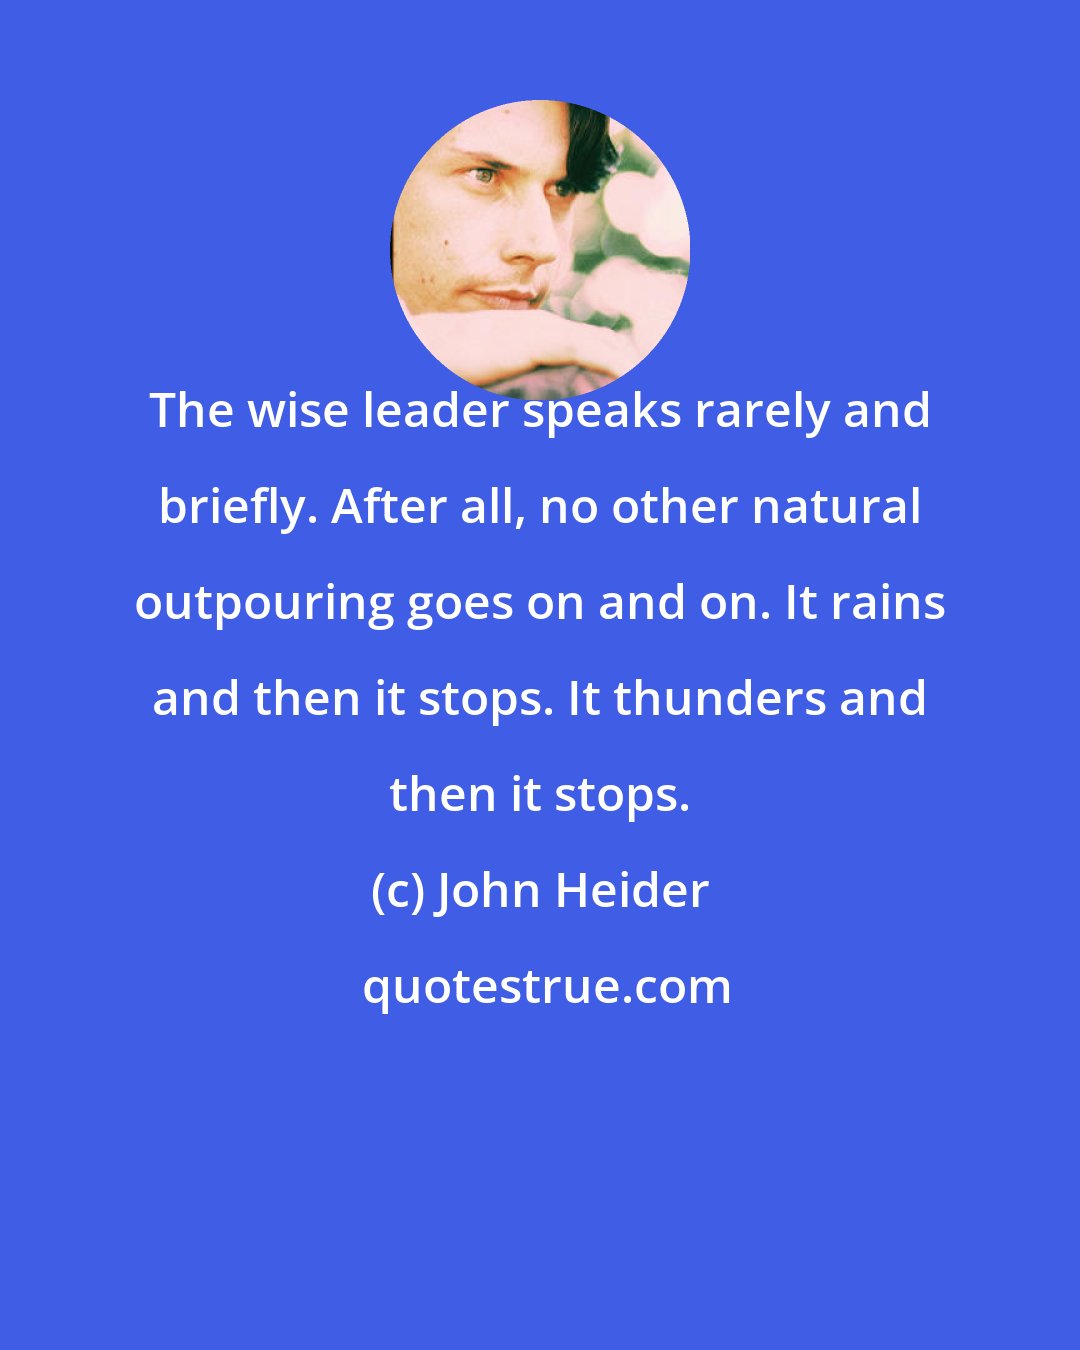 John Heider: The wise leader speaks rarely and briefly. After all, no other natural outpouring goes on and on. It rains and then it stops. It thunders and then it stops.